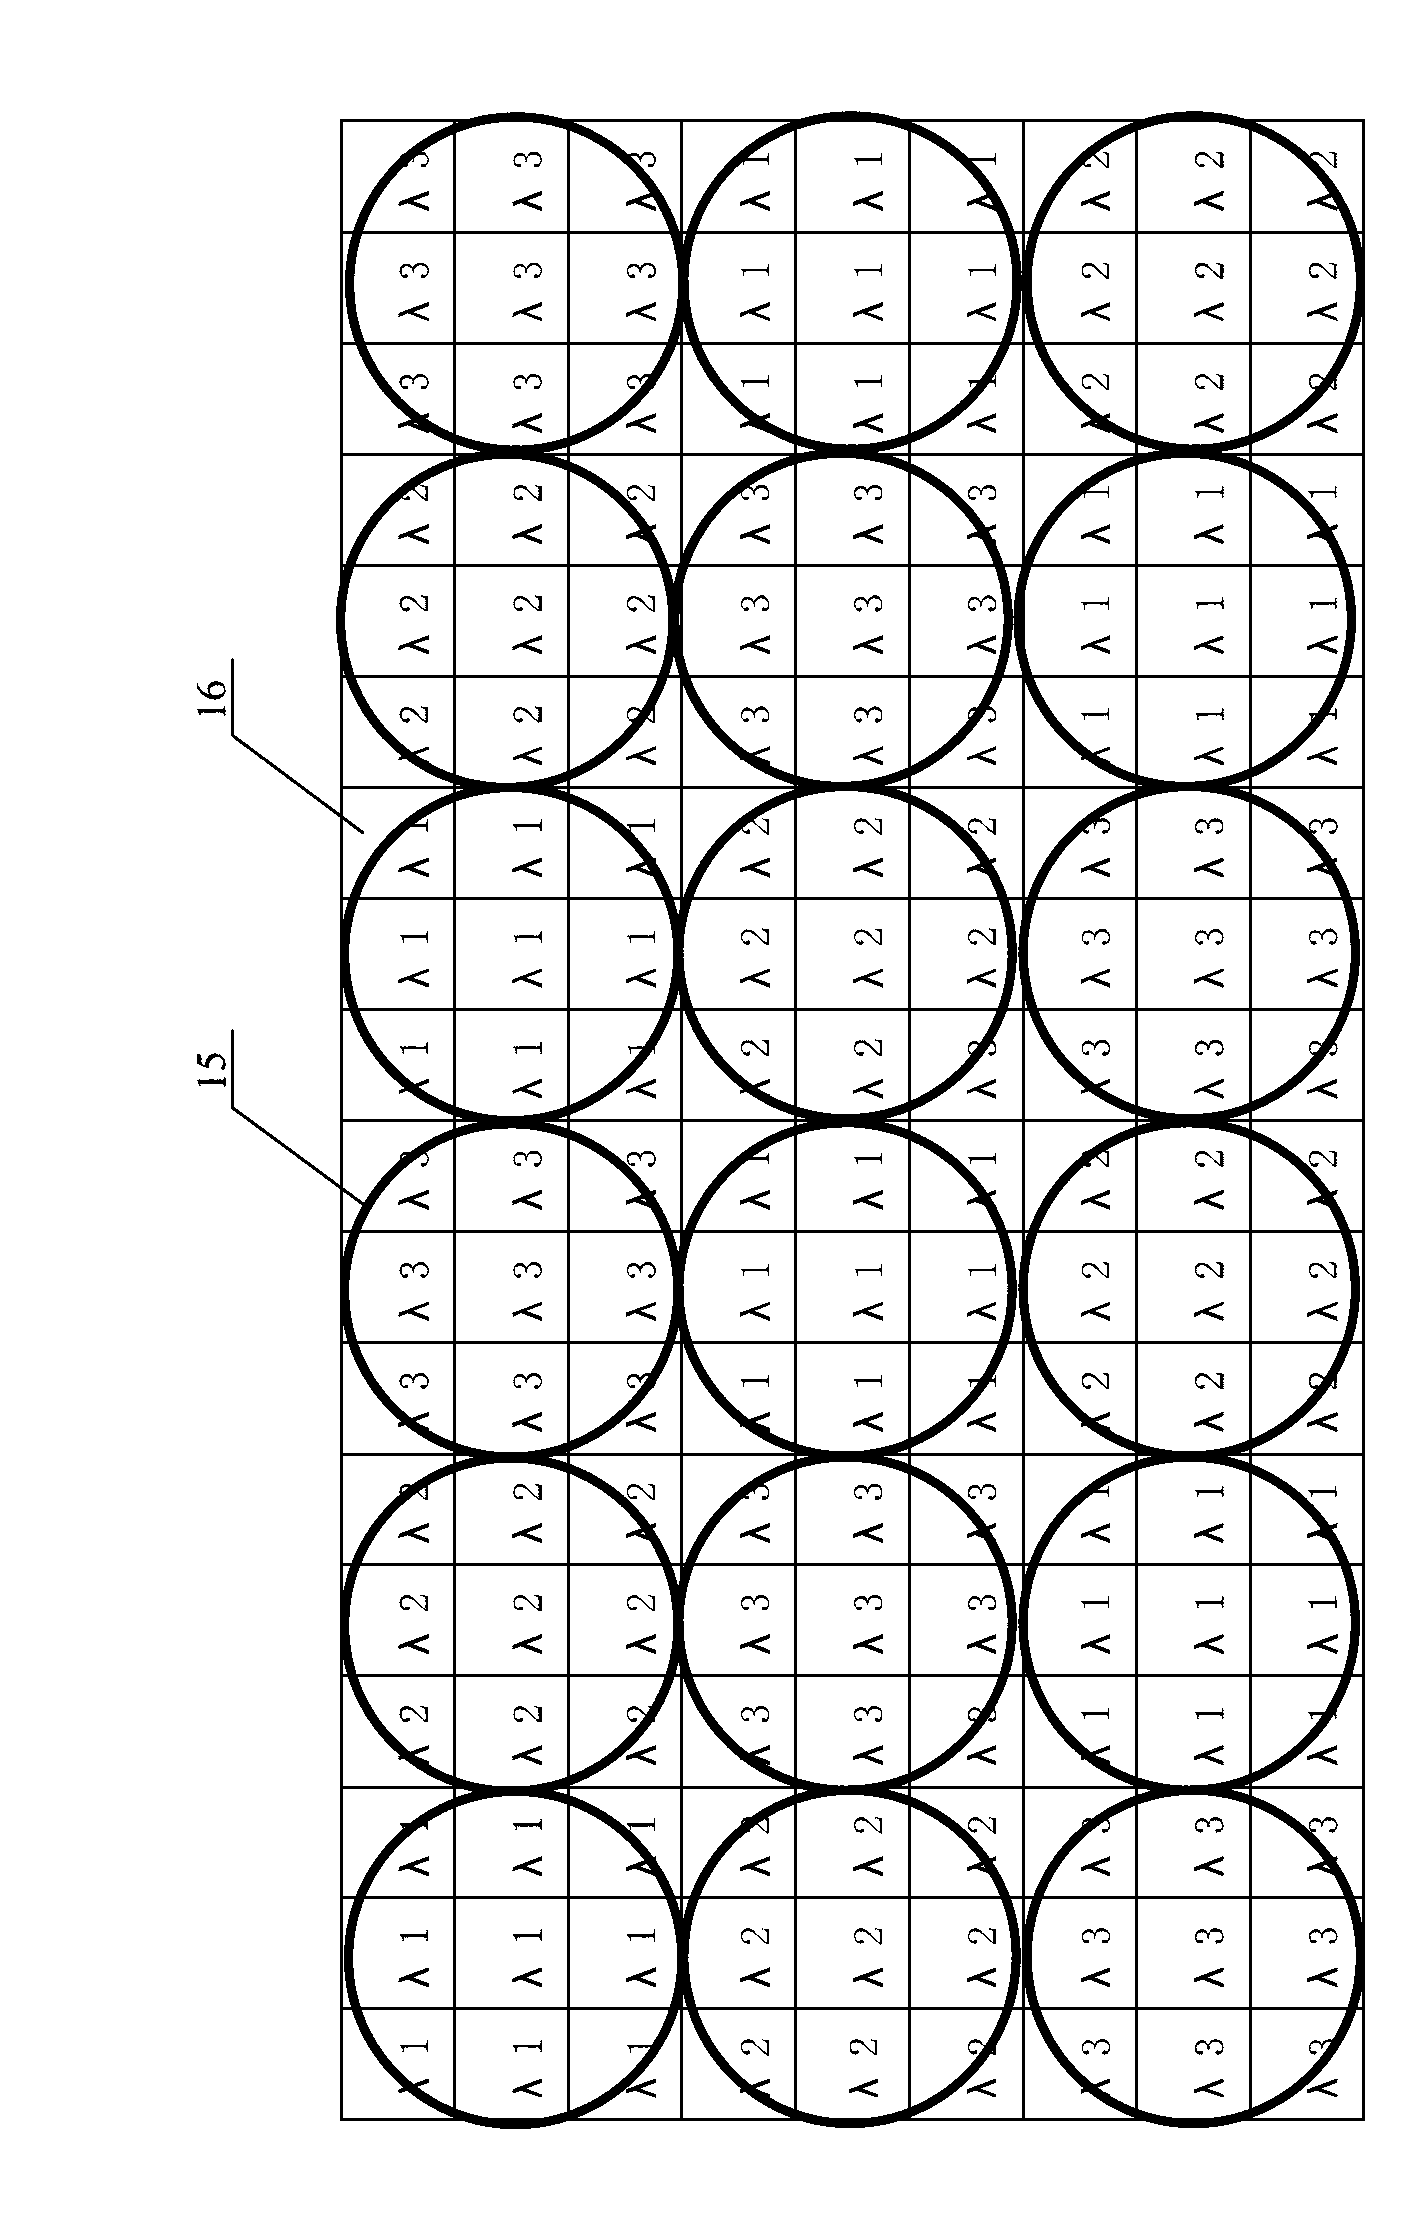 Three-dimensional display device based on constructive interferences